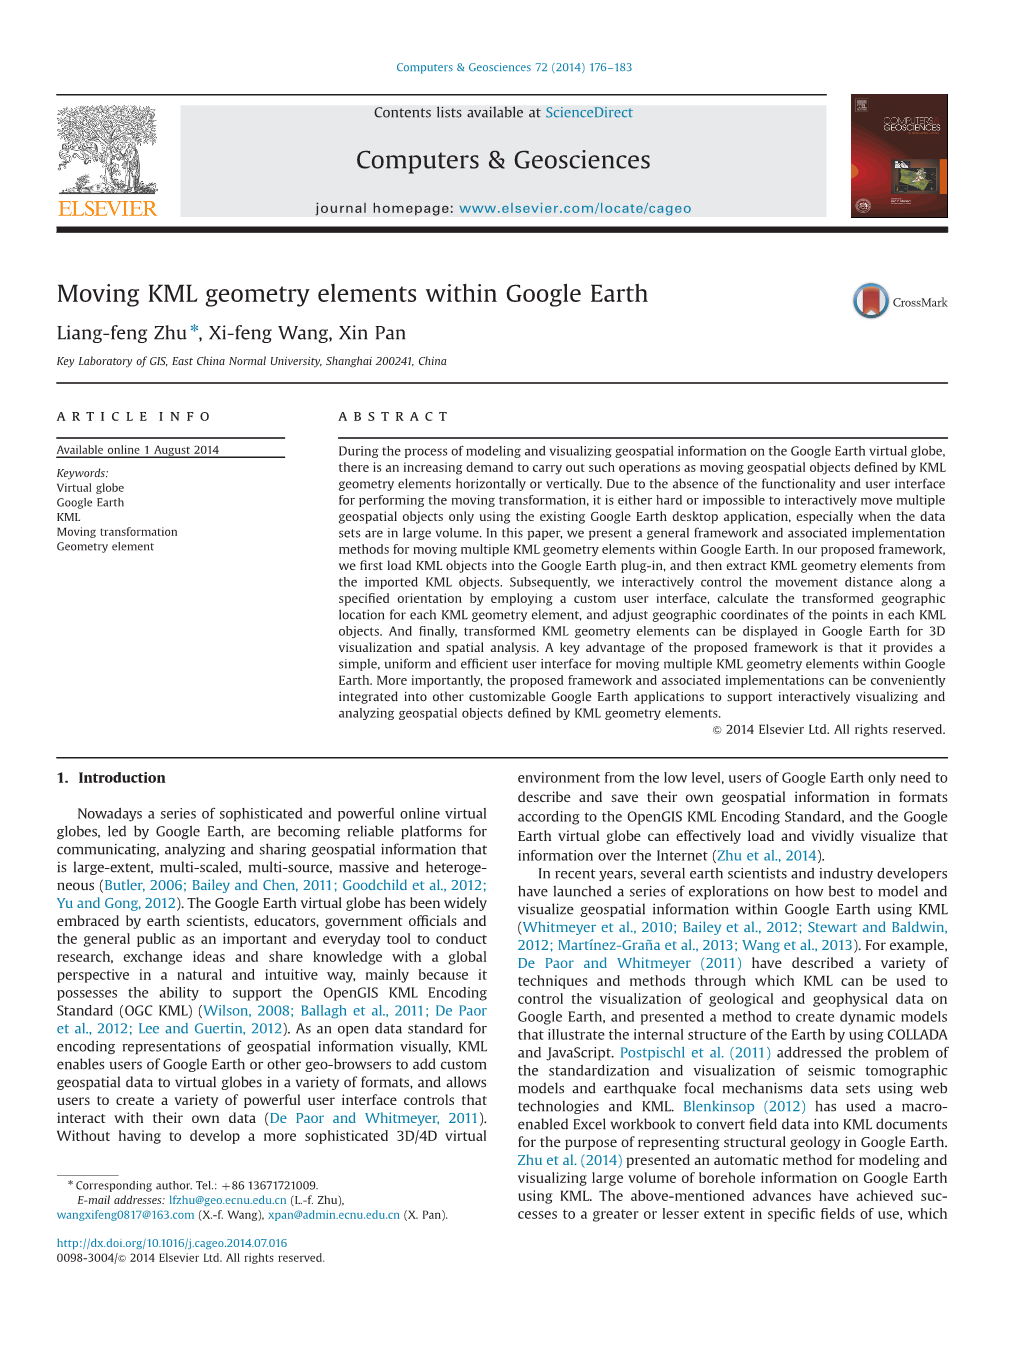 Moving KML Geometry Elements Within Google Earth